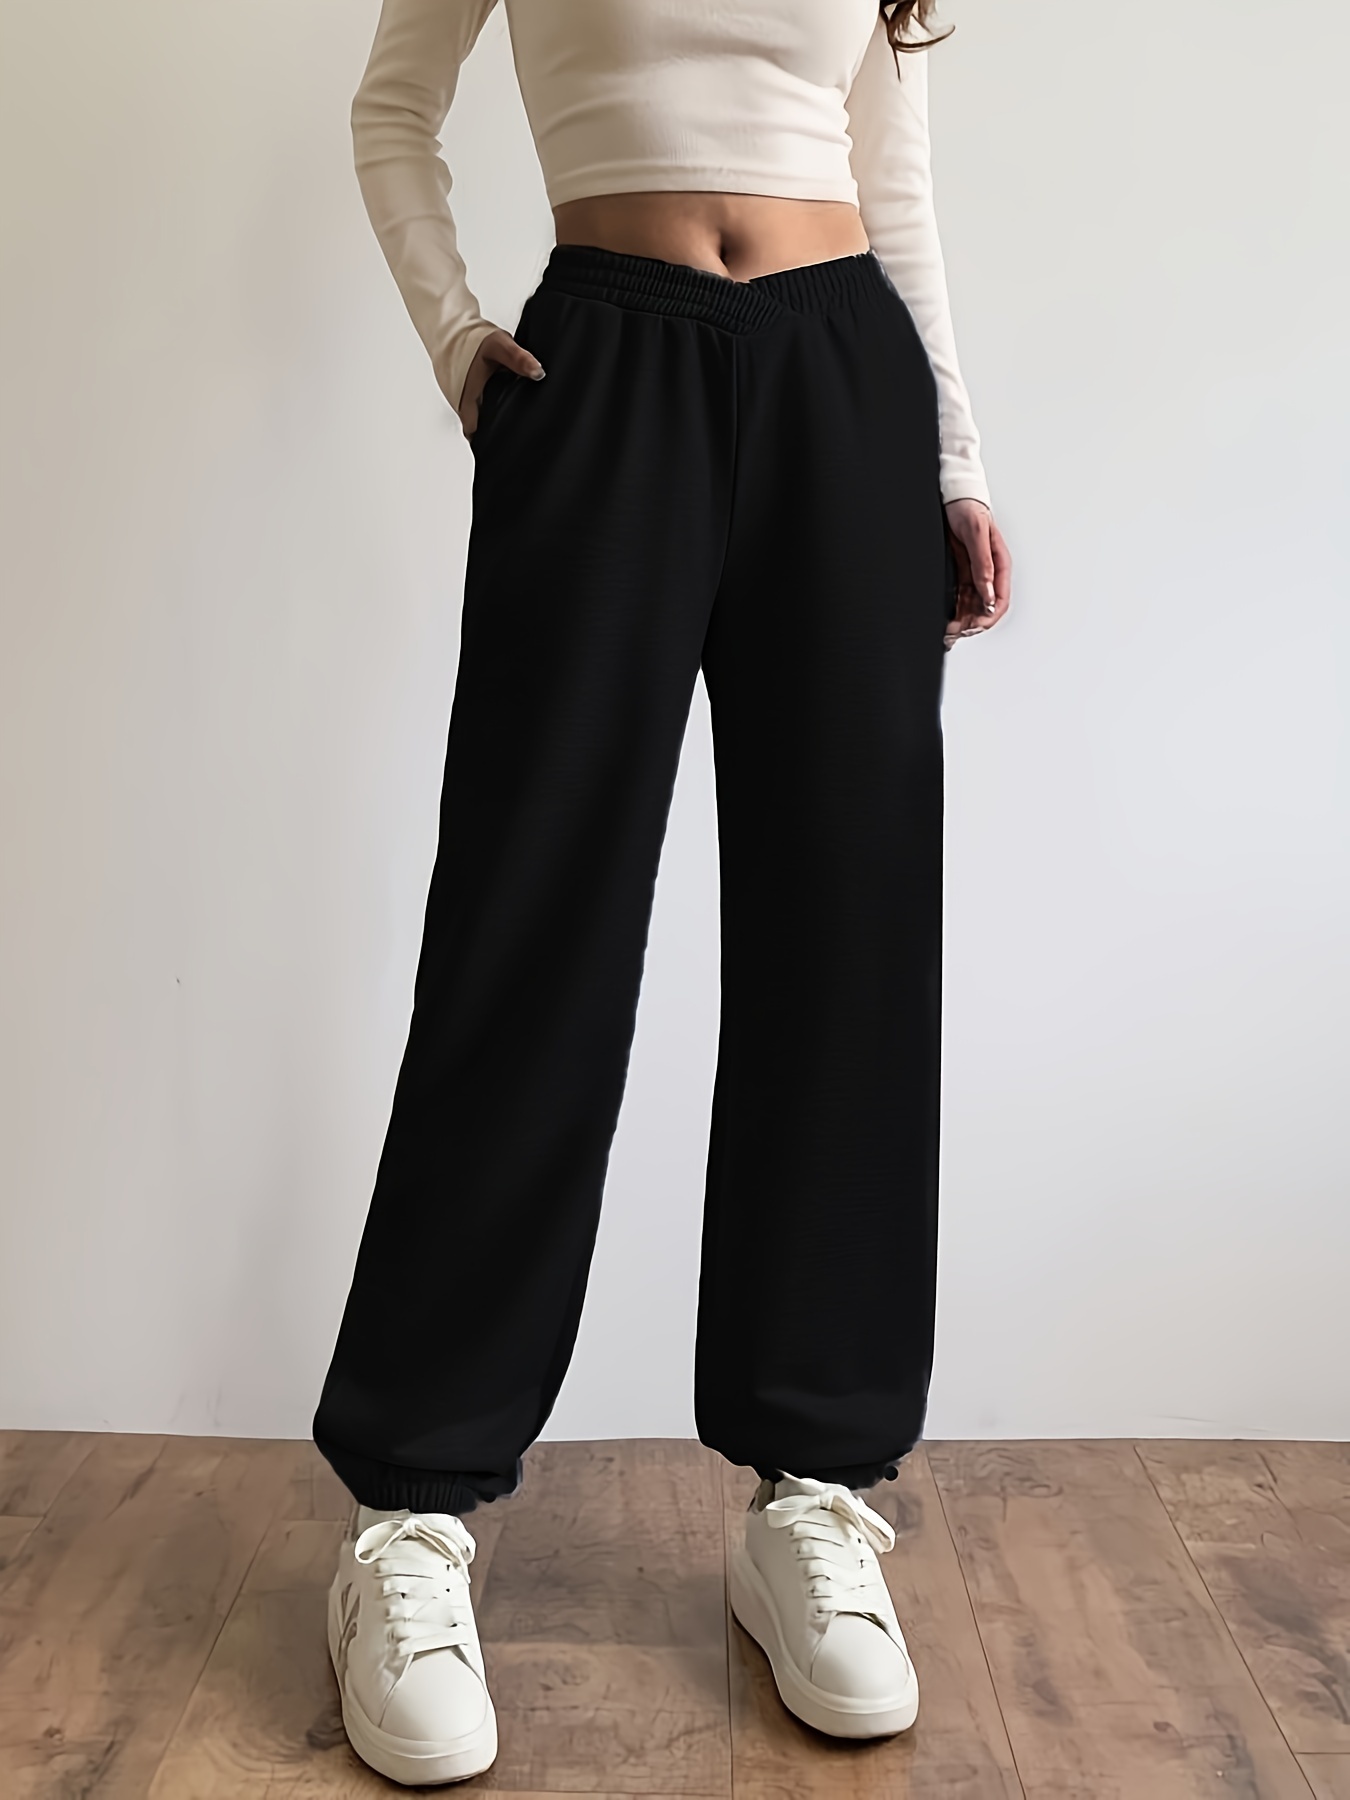 Baggy Sweatpants Ladies Solid Color Simple Fall and Winter Joggers